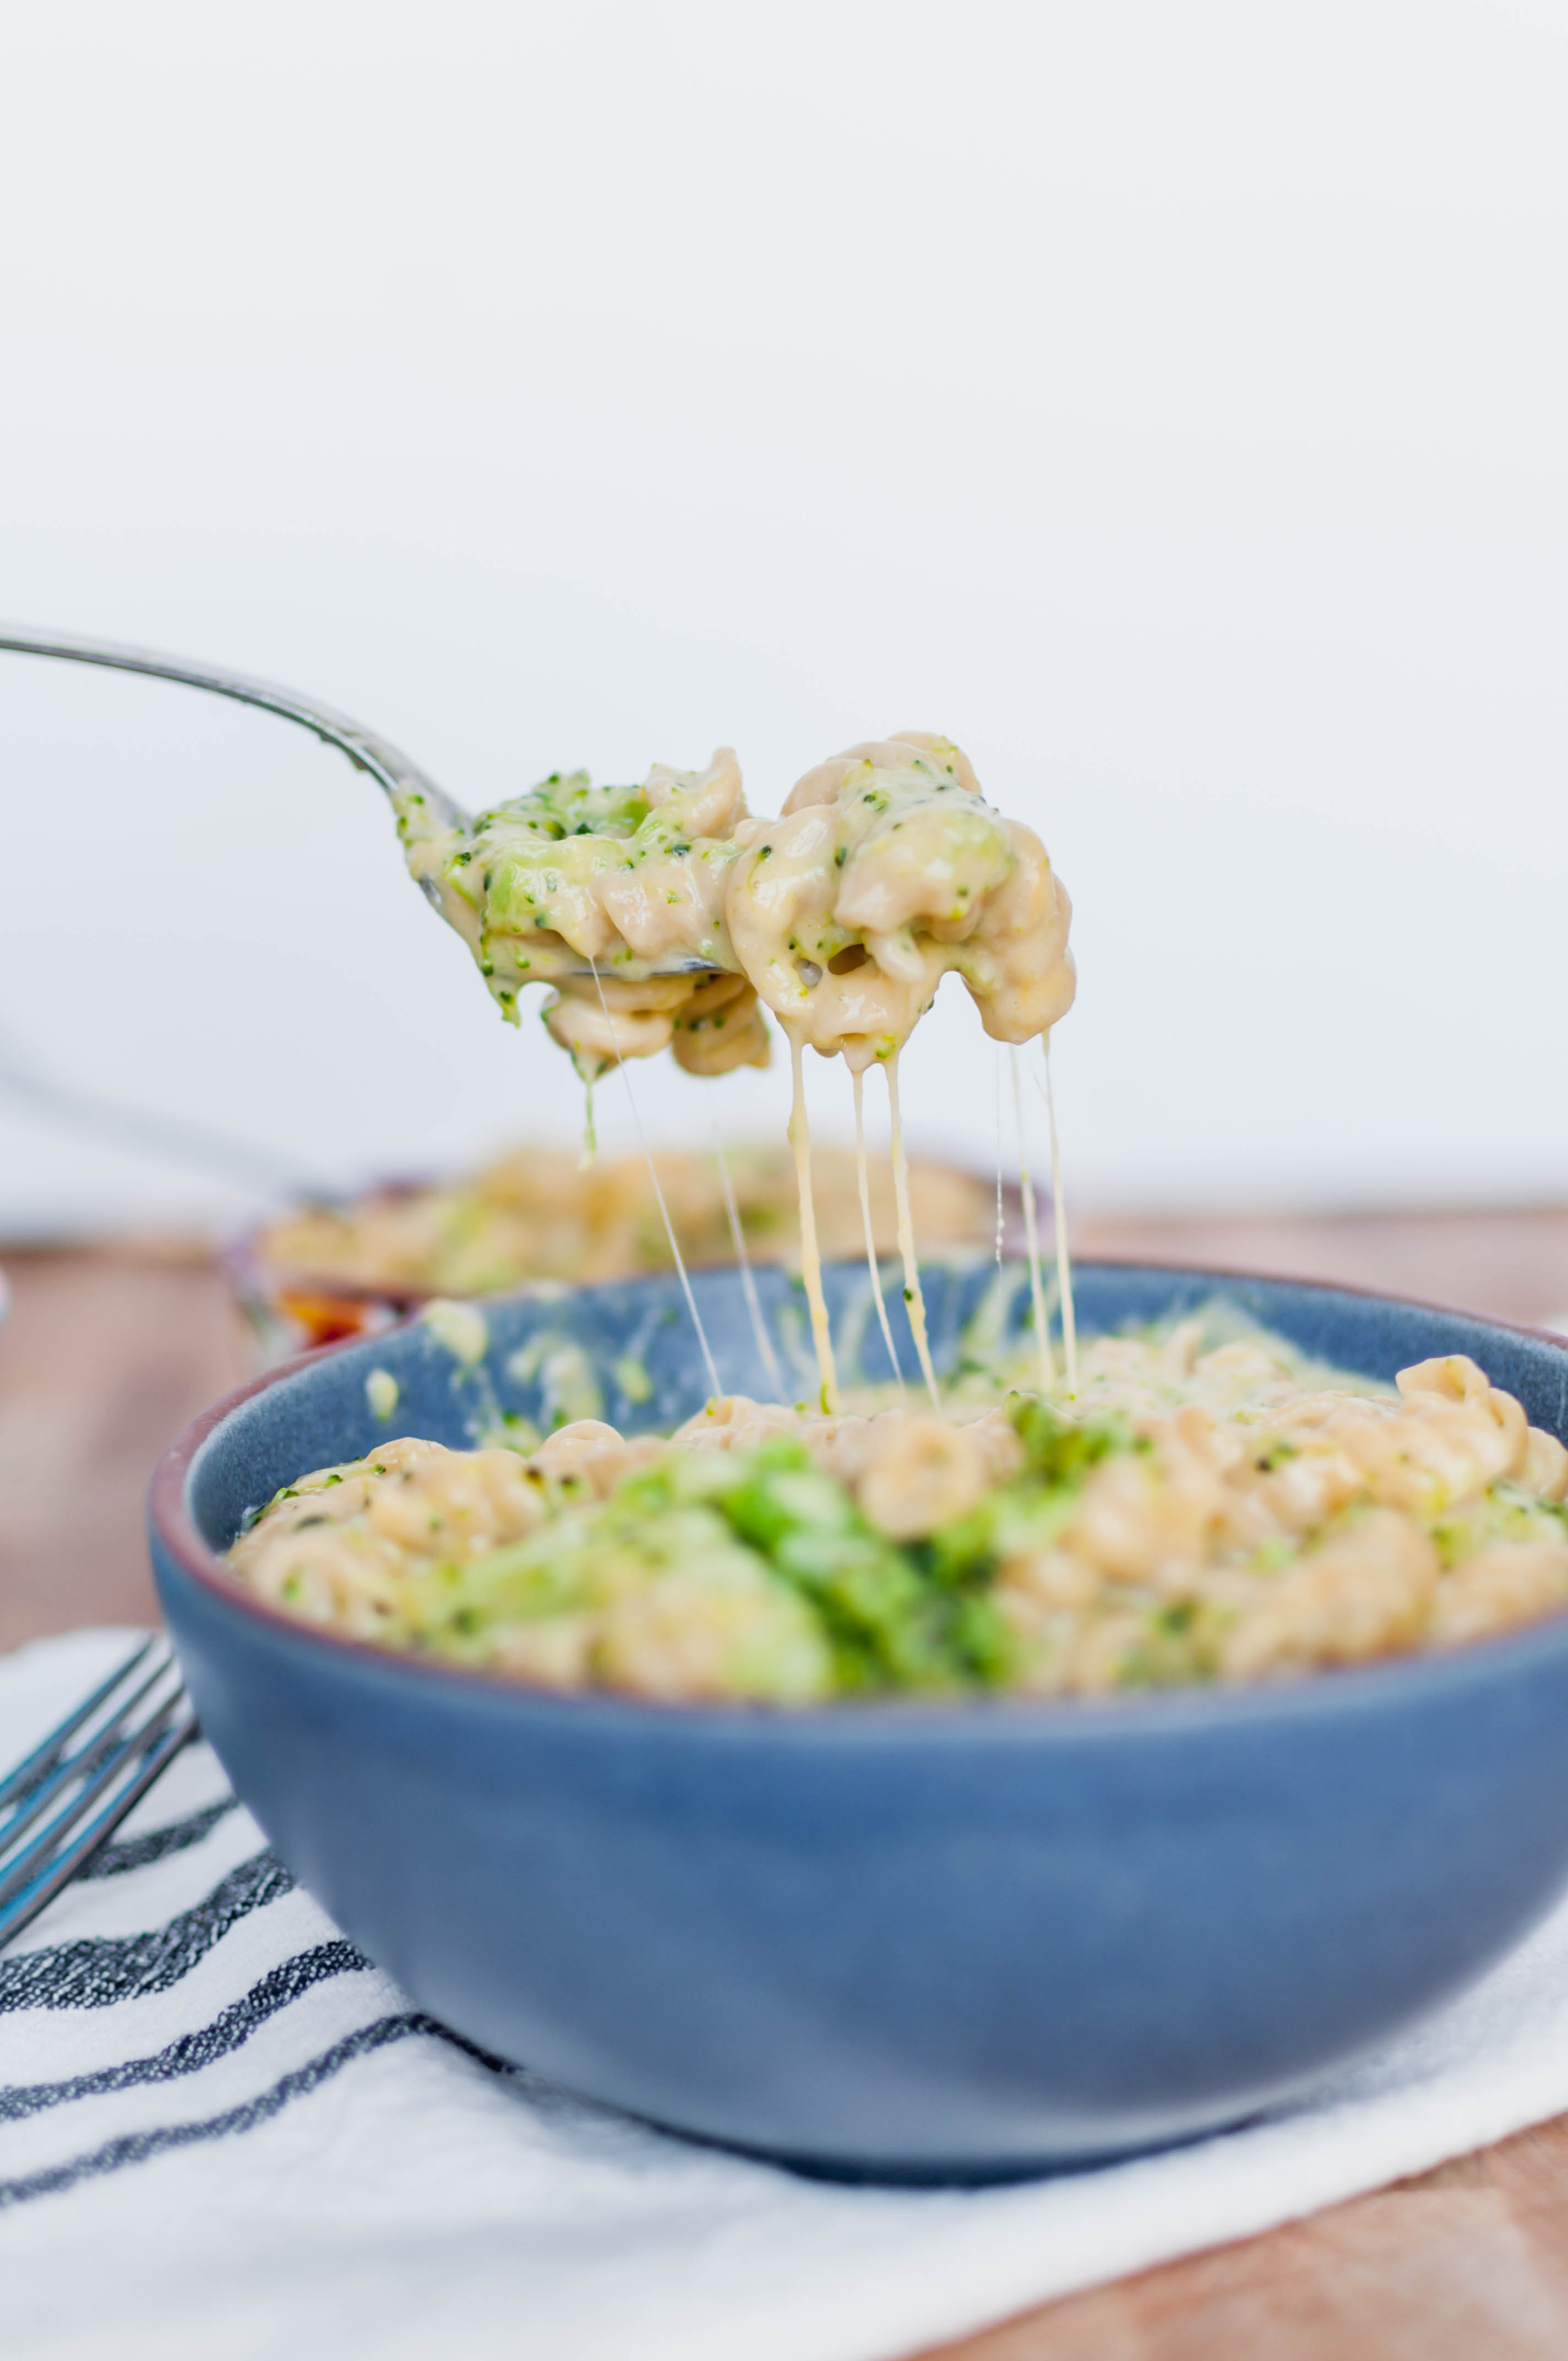 Instant Pot Broccoli Macaroni and Cheese